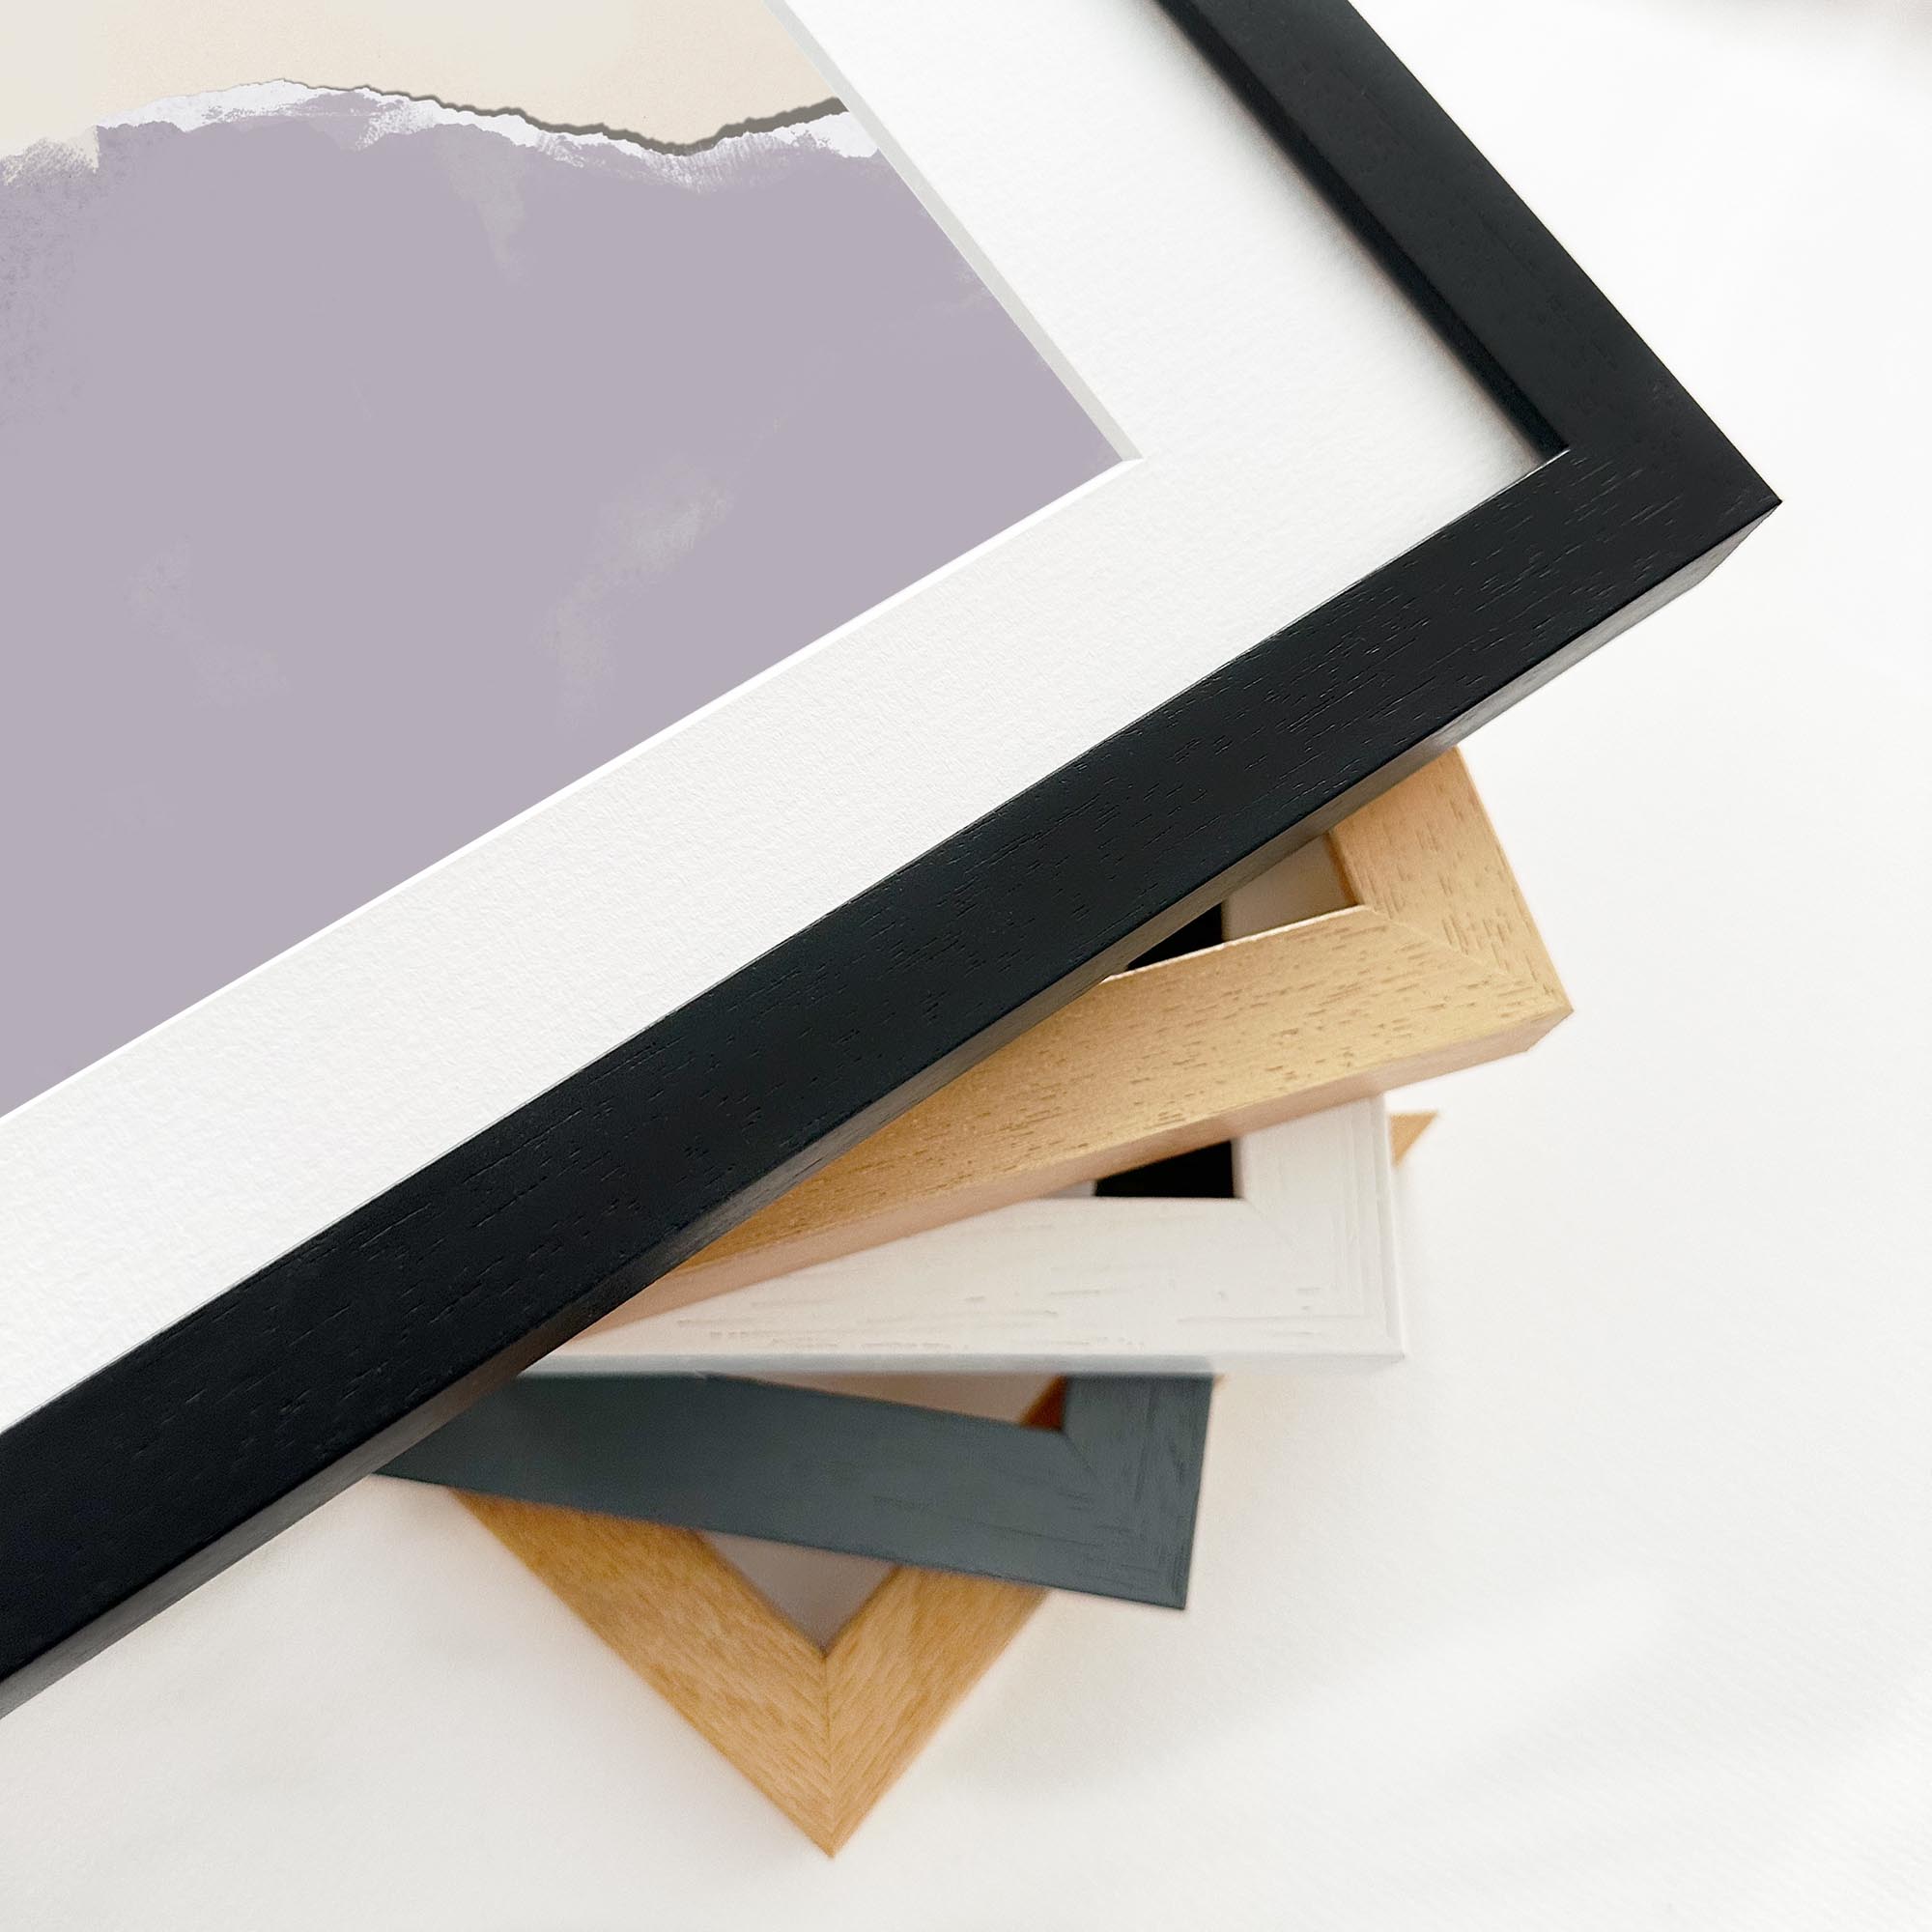 Lavender and Neutral Abstract Shapes Art Print